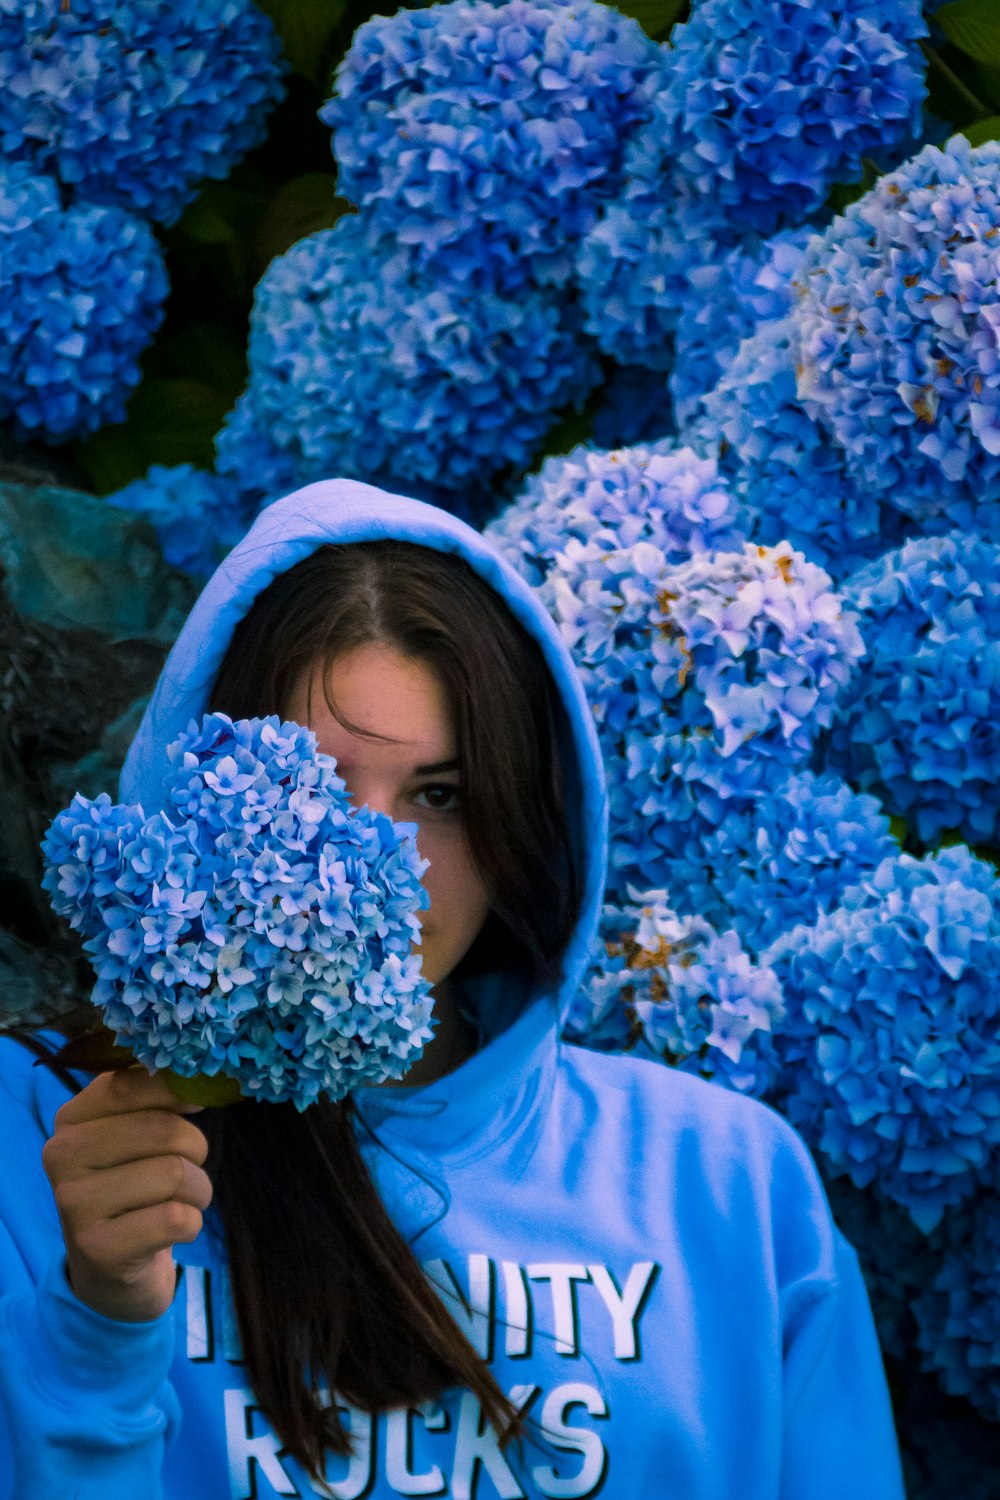 woman in blue hijab holding blue flowers